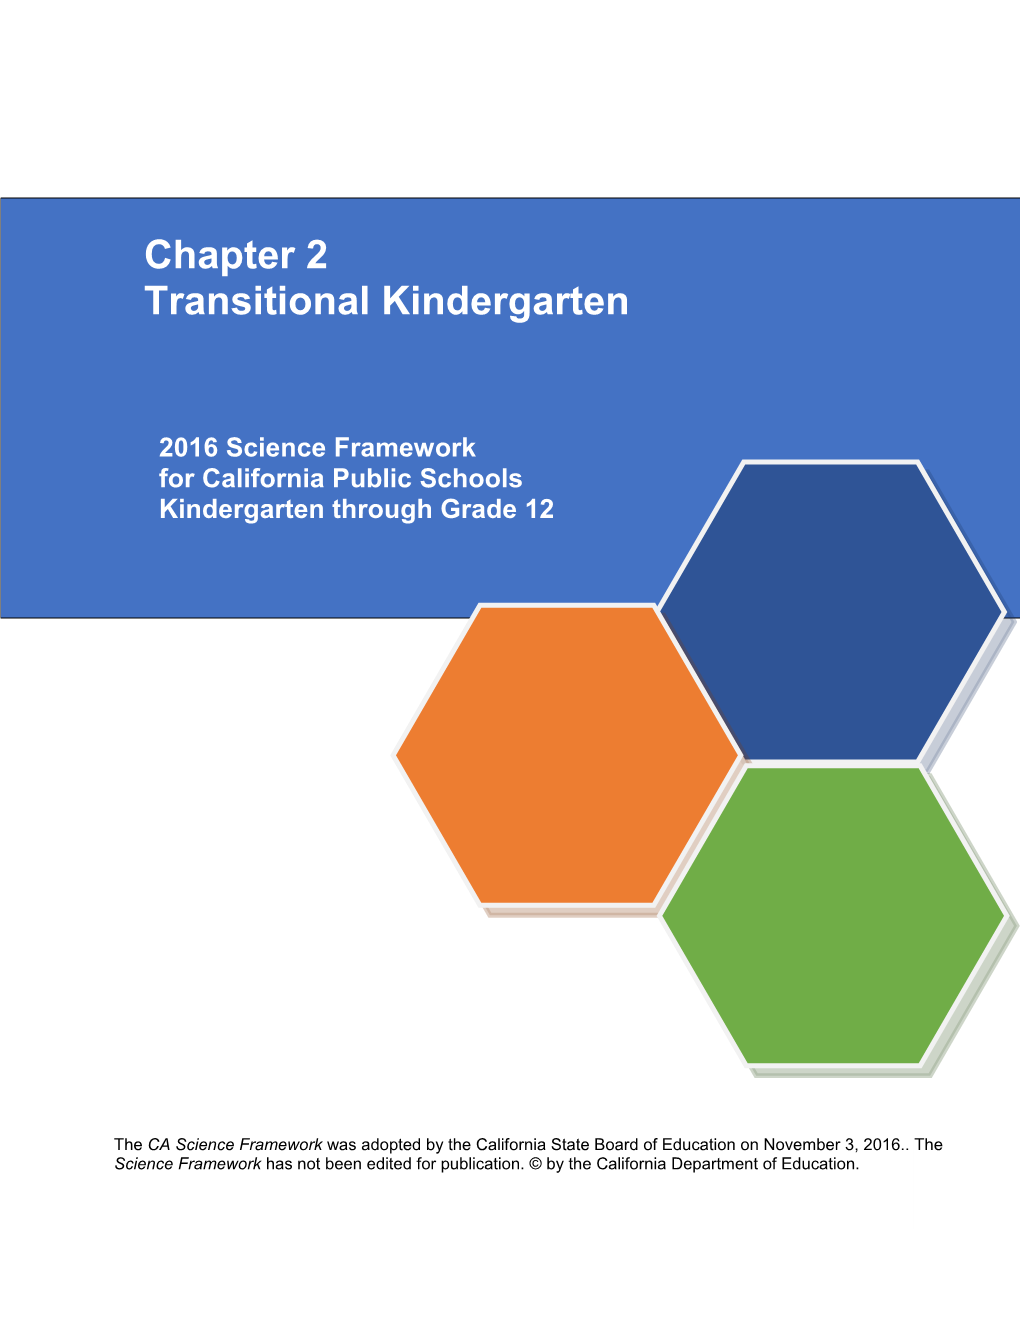 Science FW, Transitional K - Curriculum Frameworks (CA Dept of Education)